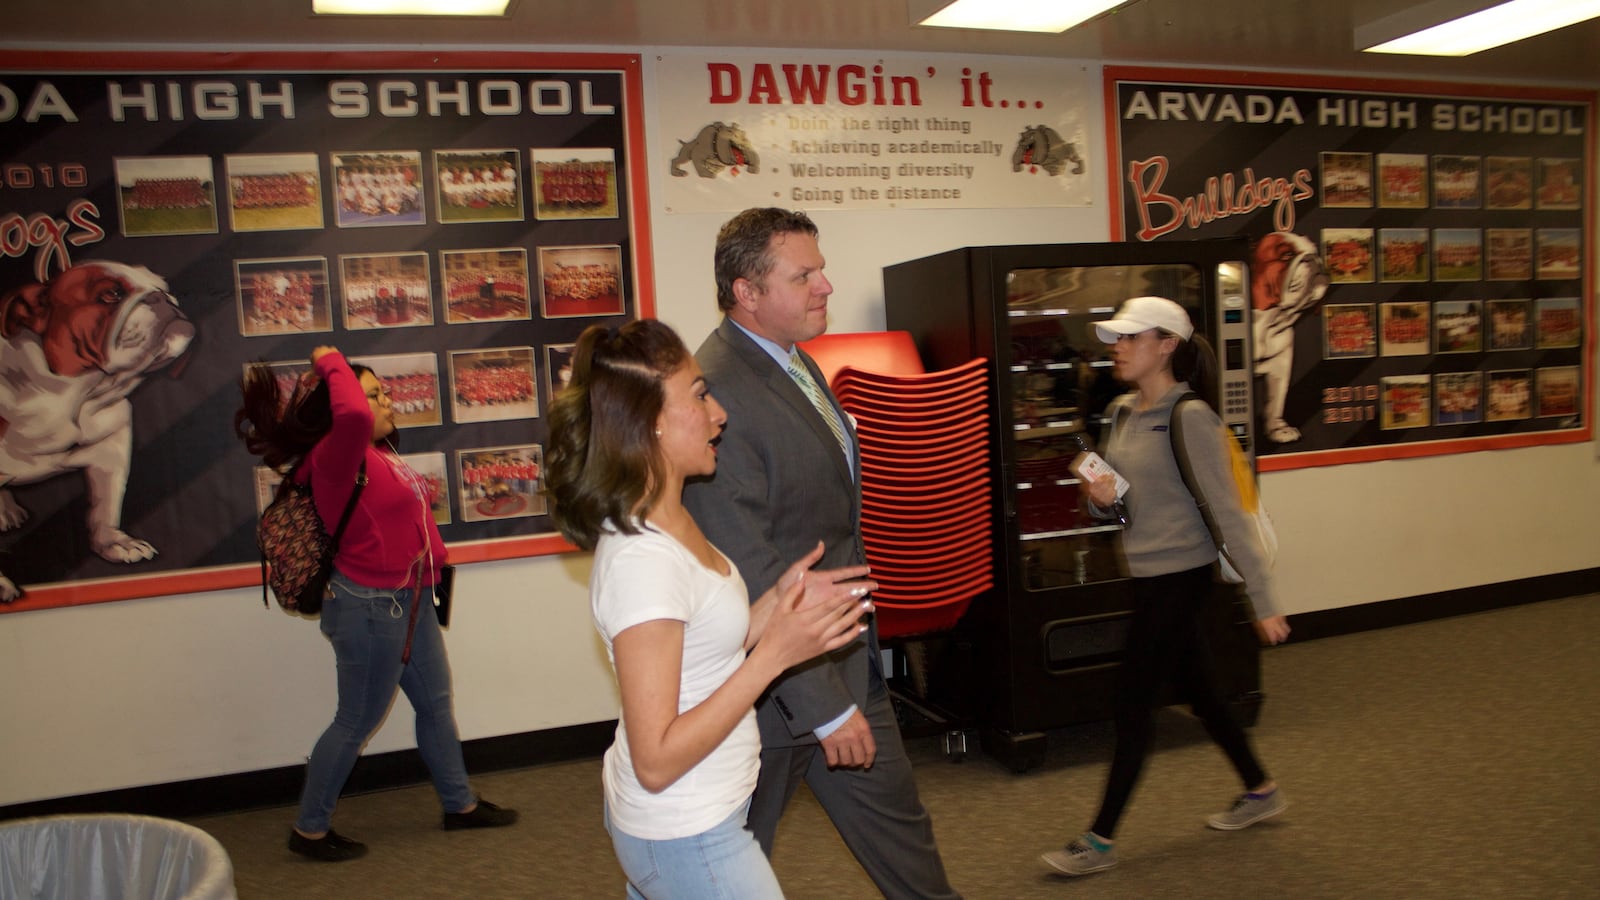 Jason Glass, the sole finalist for the superintendent position in Jeffco Public Schools, toured Arvada High School in May. (Photo by Yesenia Robles, Chalkbeat)